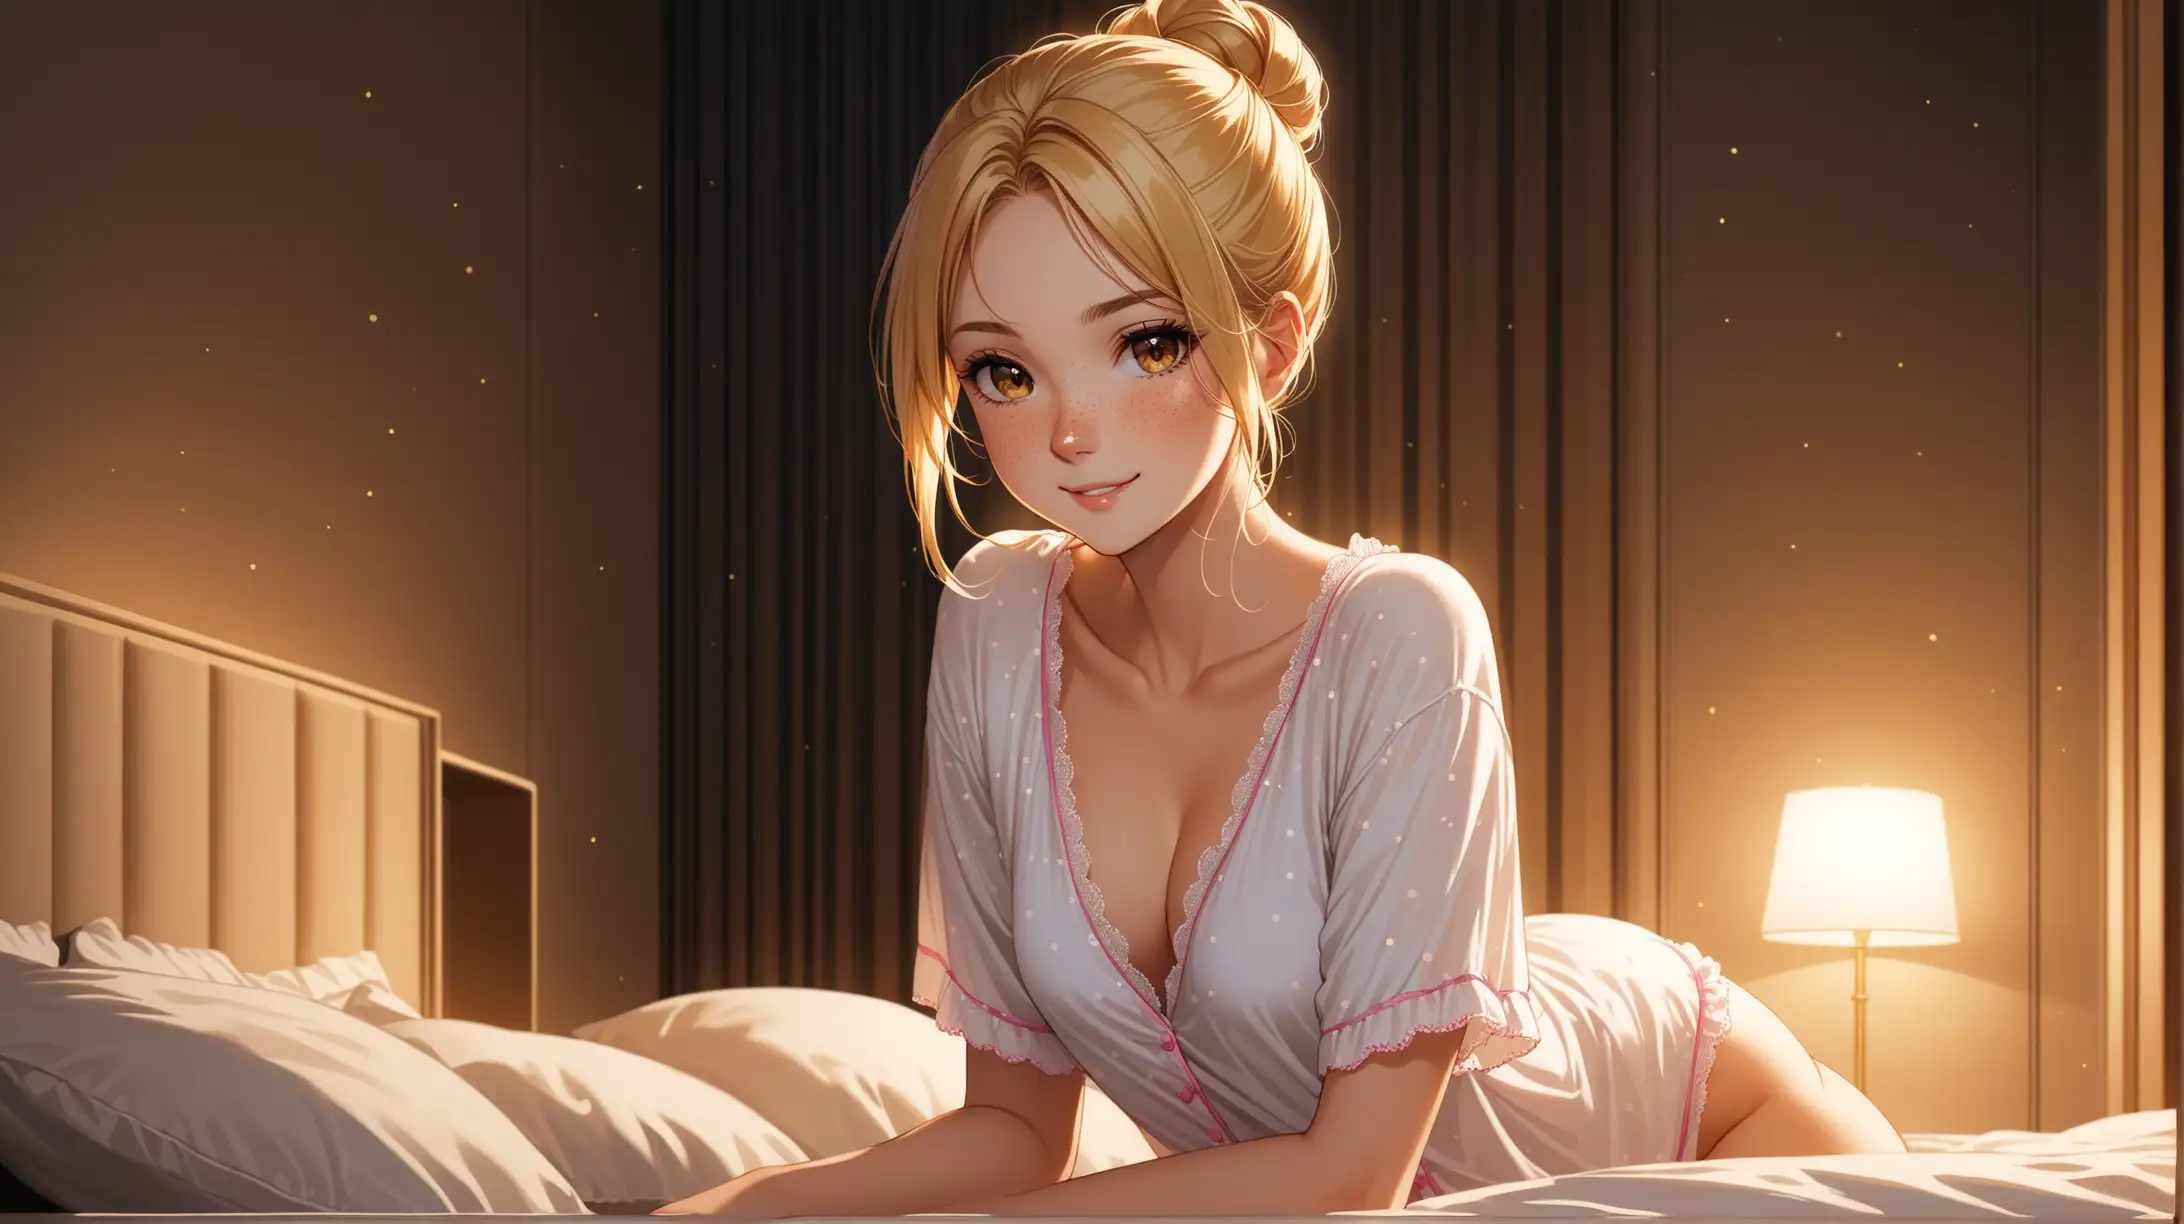 Draw a young woman, long blonde hair in a bun, gold eyes, freckles, perky figure,
sleepwear, high quality, long shot, indoors, bedroom, seductive pose, dark lighting, smiling at the viewer